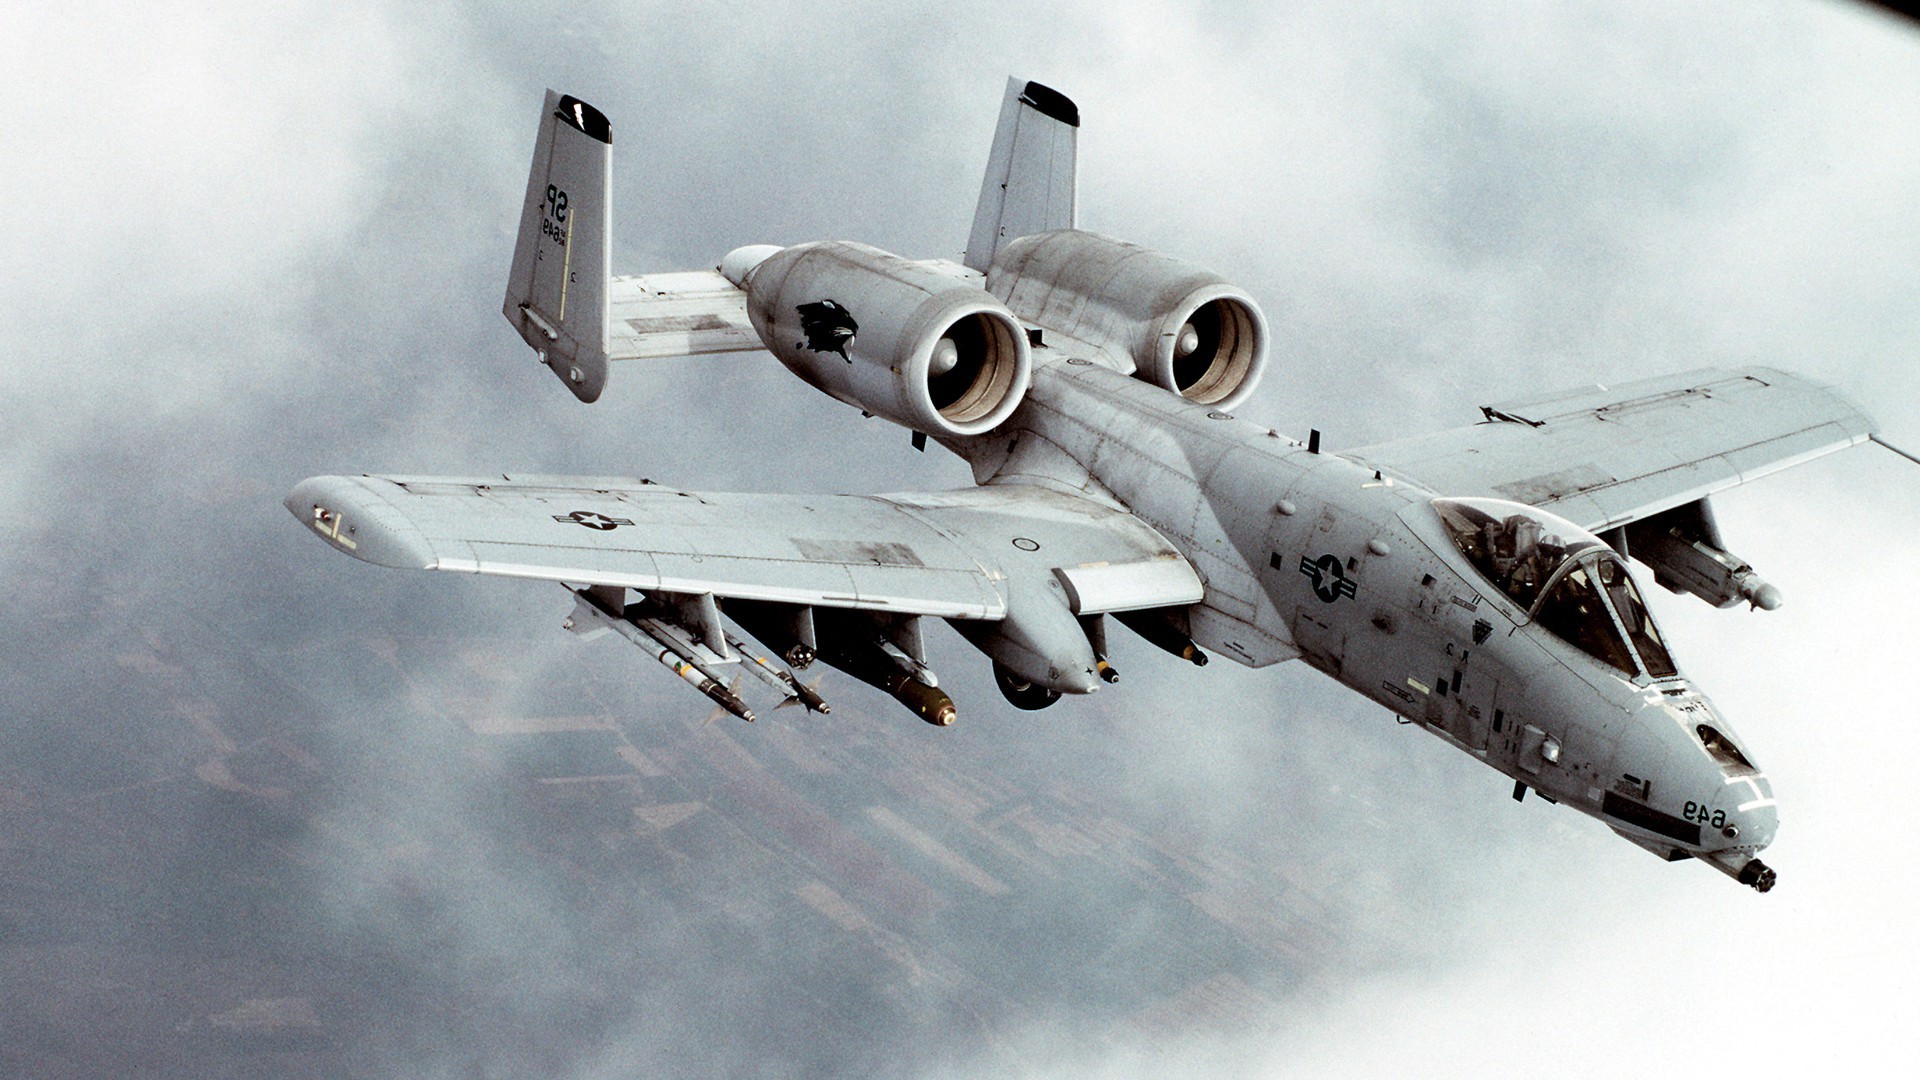 A10 Warthog Airplane Military Aircraft Aircraft Jet Fighter Machine Gun Bomber Wallpapers Hd Desktop And Mobile Backgrounds 1920x1080